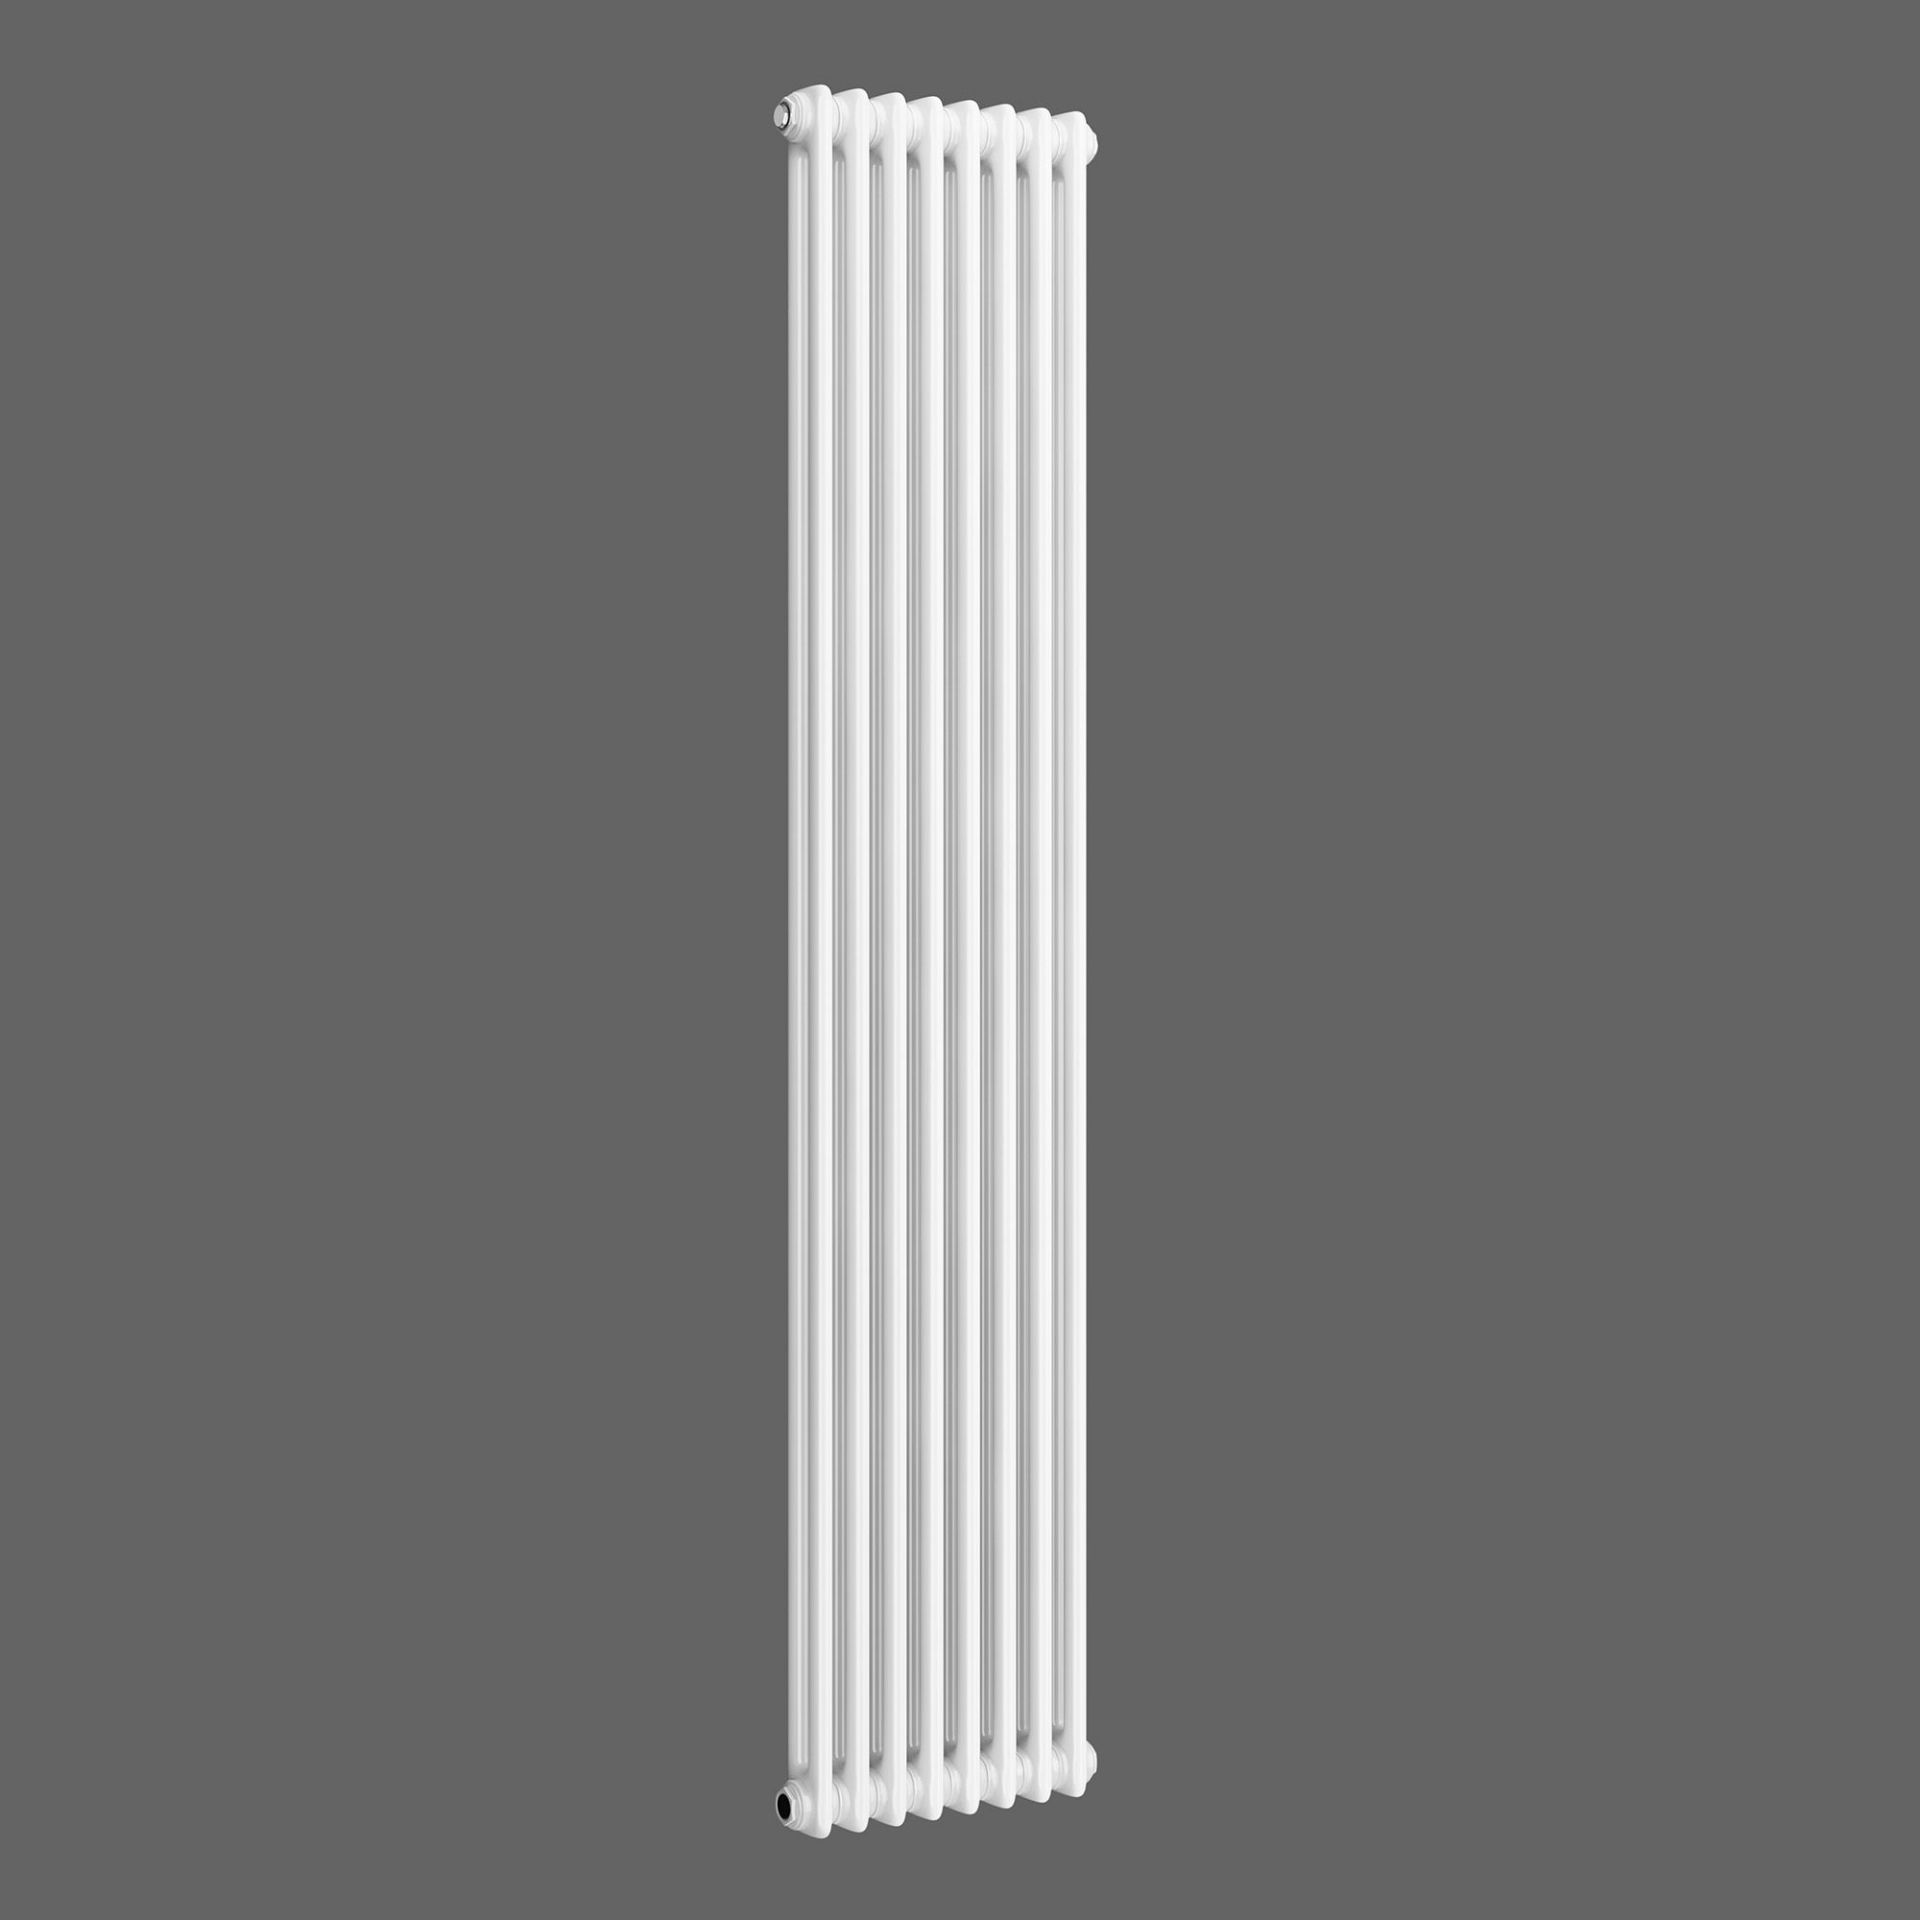 NEW (PC85) 1800x380mm White Double Panel Vertical Colosseum Radiator 1800x380mm. RRP £299.99. ...